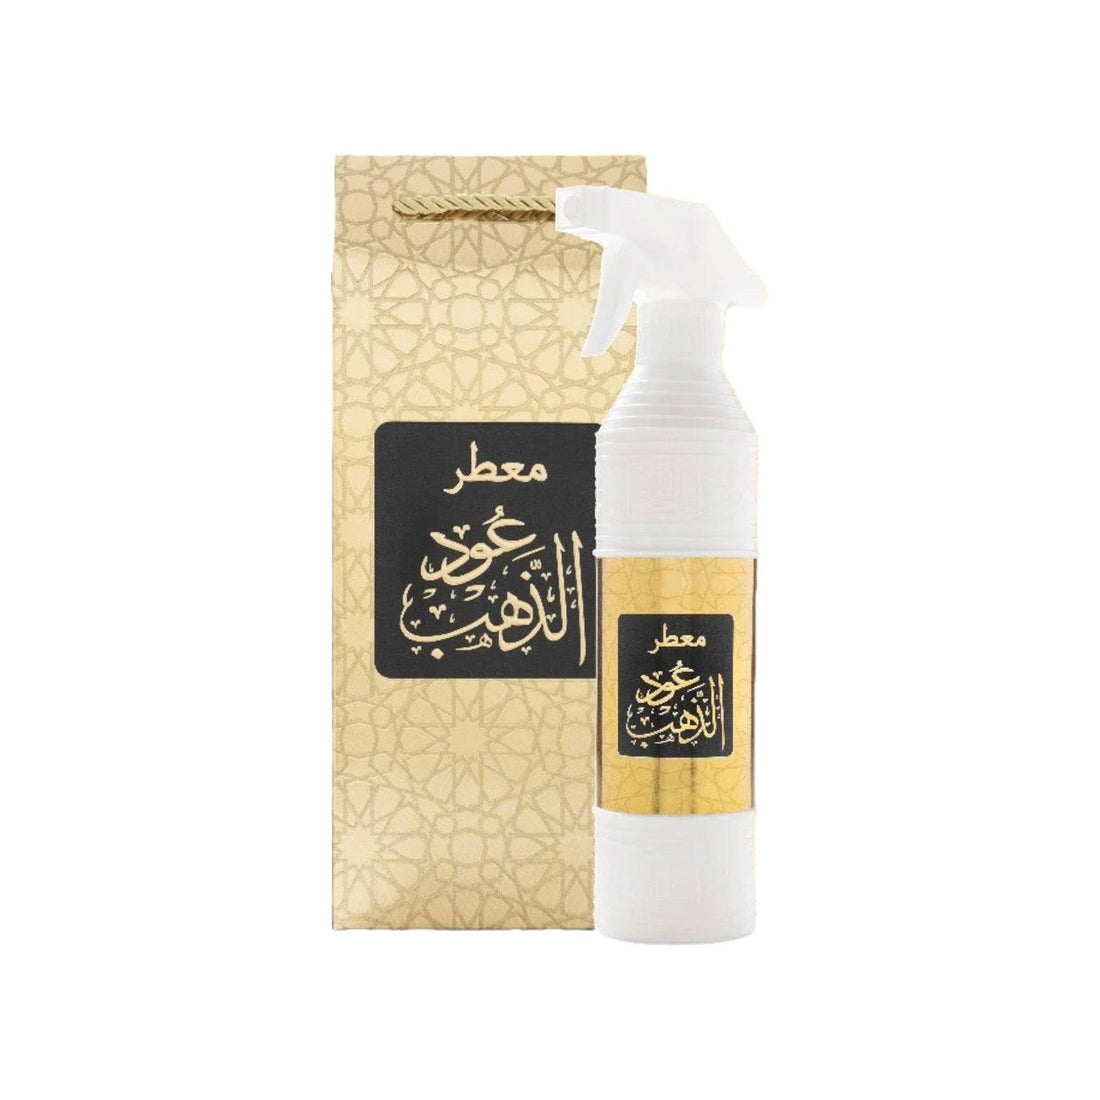 500 ml bottle of Oud Al Dahab Air Freshener by Oud Lover, showcasing its elegant packaging and highlighting the alcohol-free, exotic blend of jasmine, rose, and amber notes.